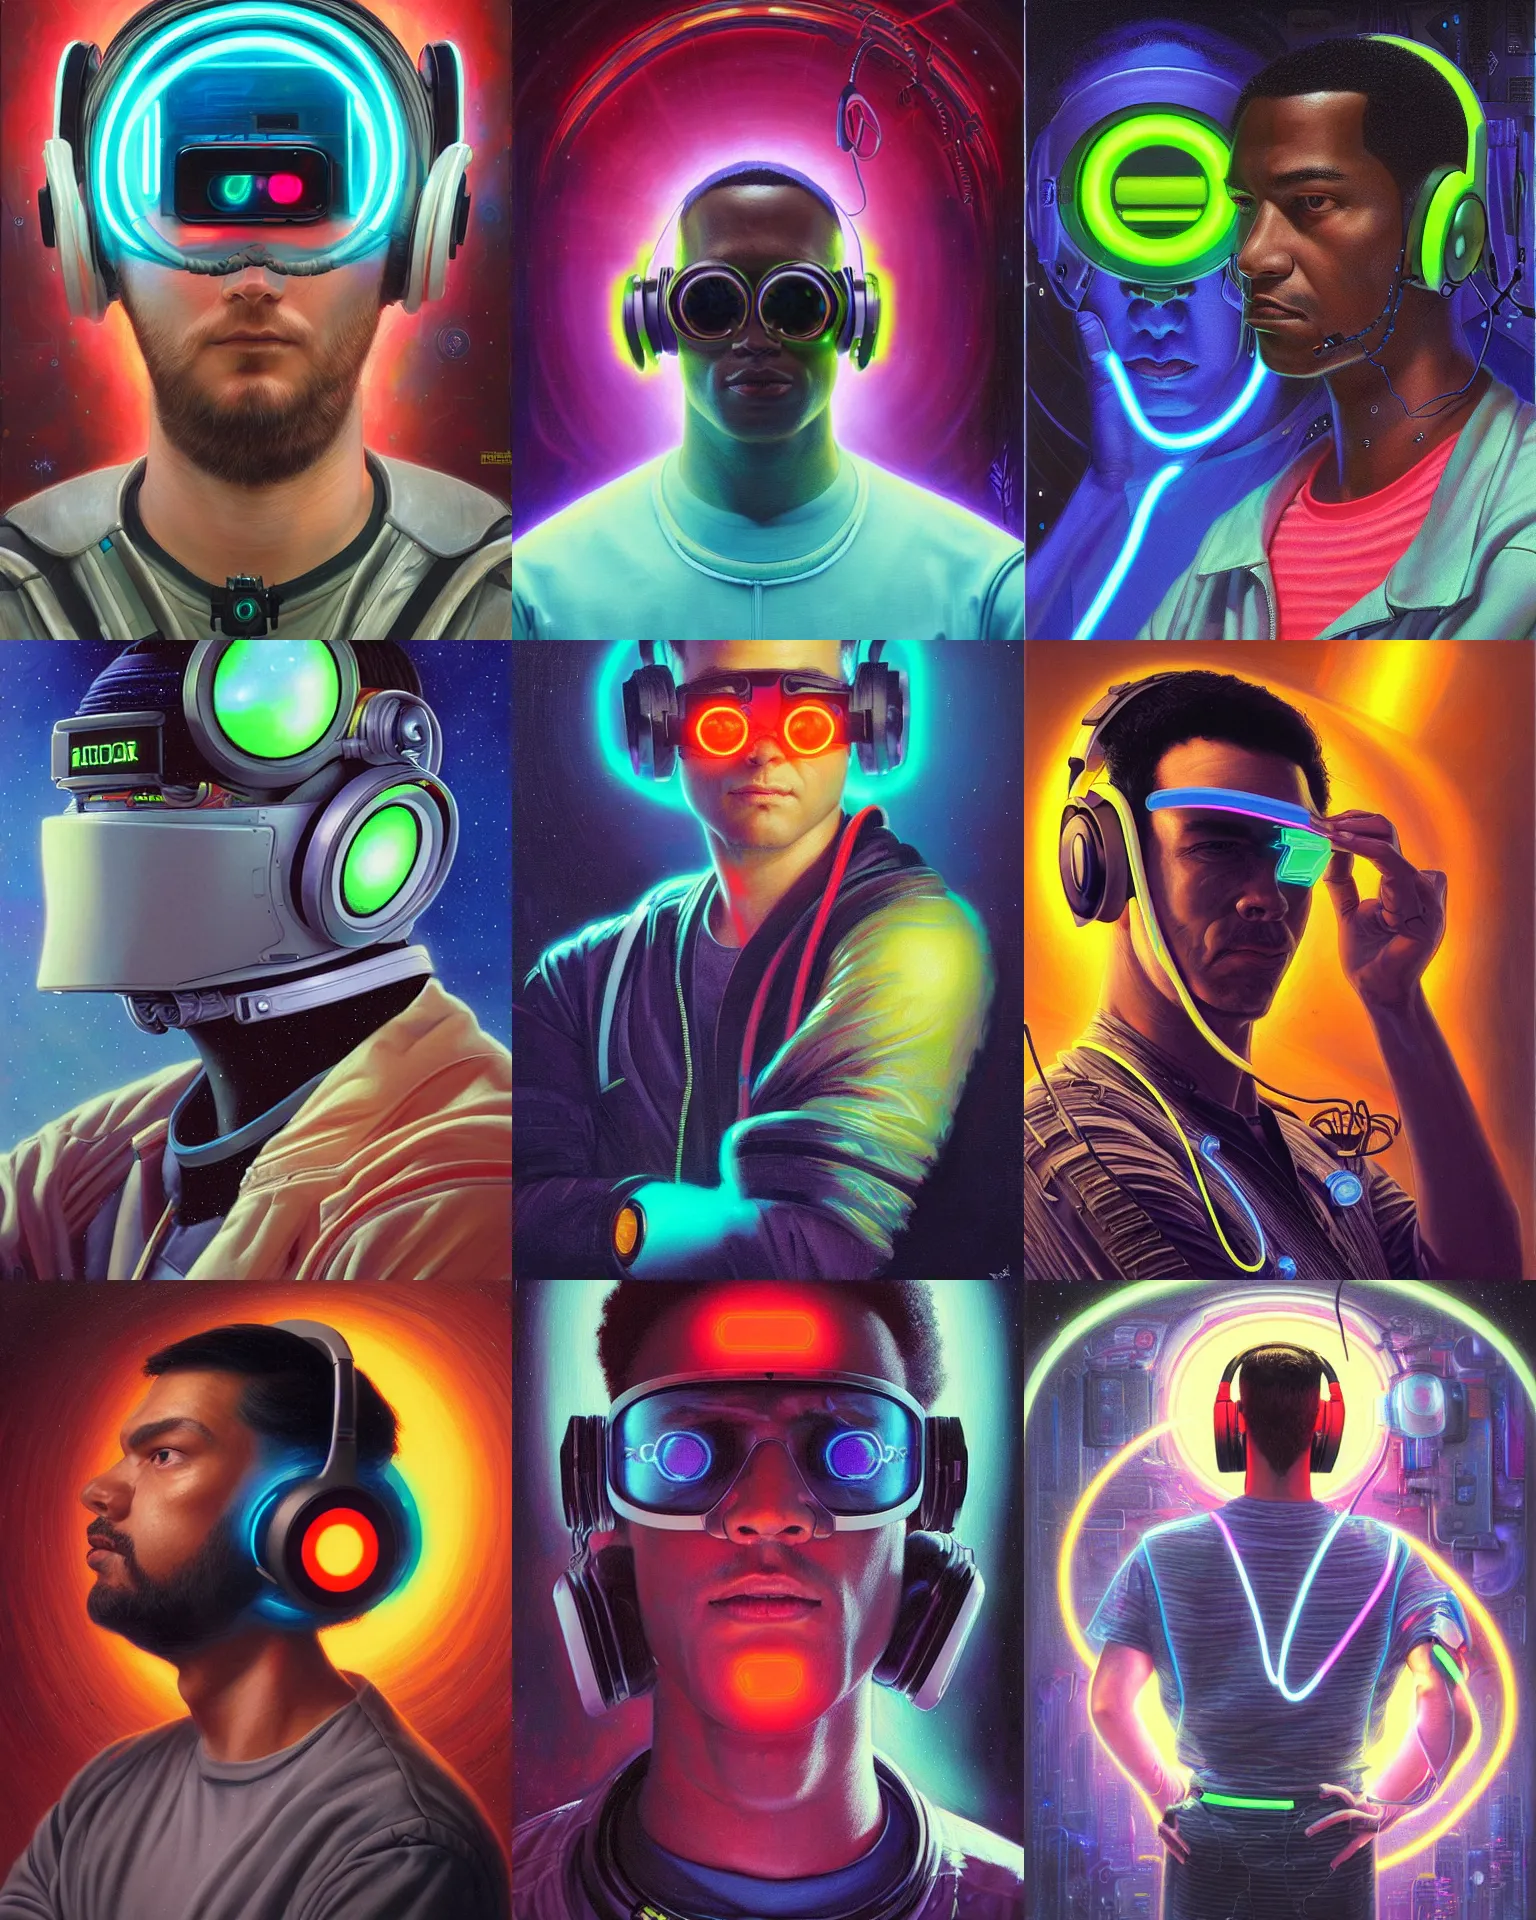 Prompt: neon cyberpunk programmer with glowing geordi cyclops visor over eyes and sleek headphones head turned desaturated portrait painting by donato giancola, dean cornwall, rhads, tom whalen, alex grey astronaut fashion photography